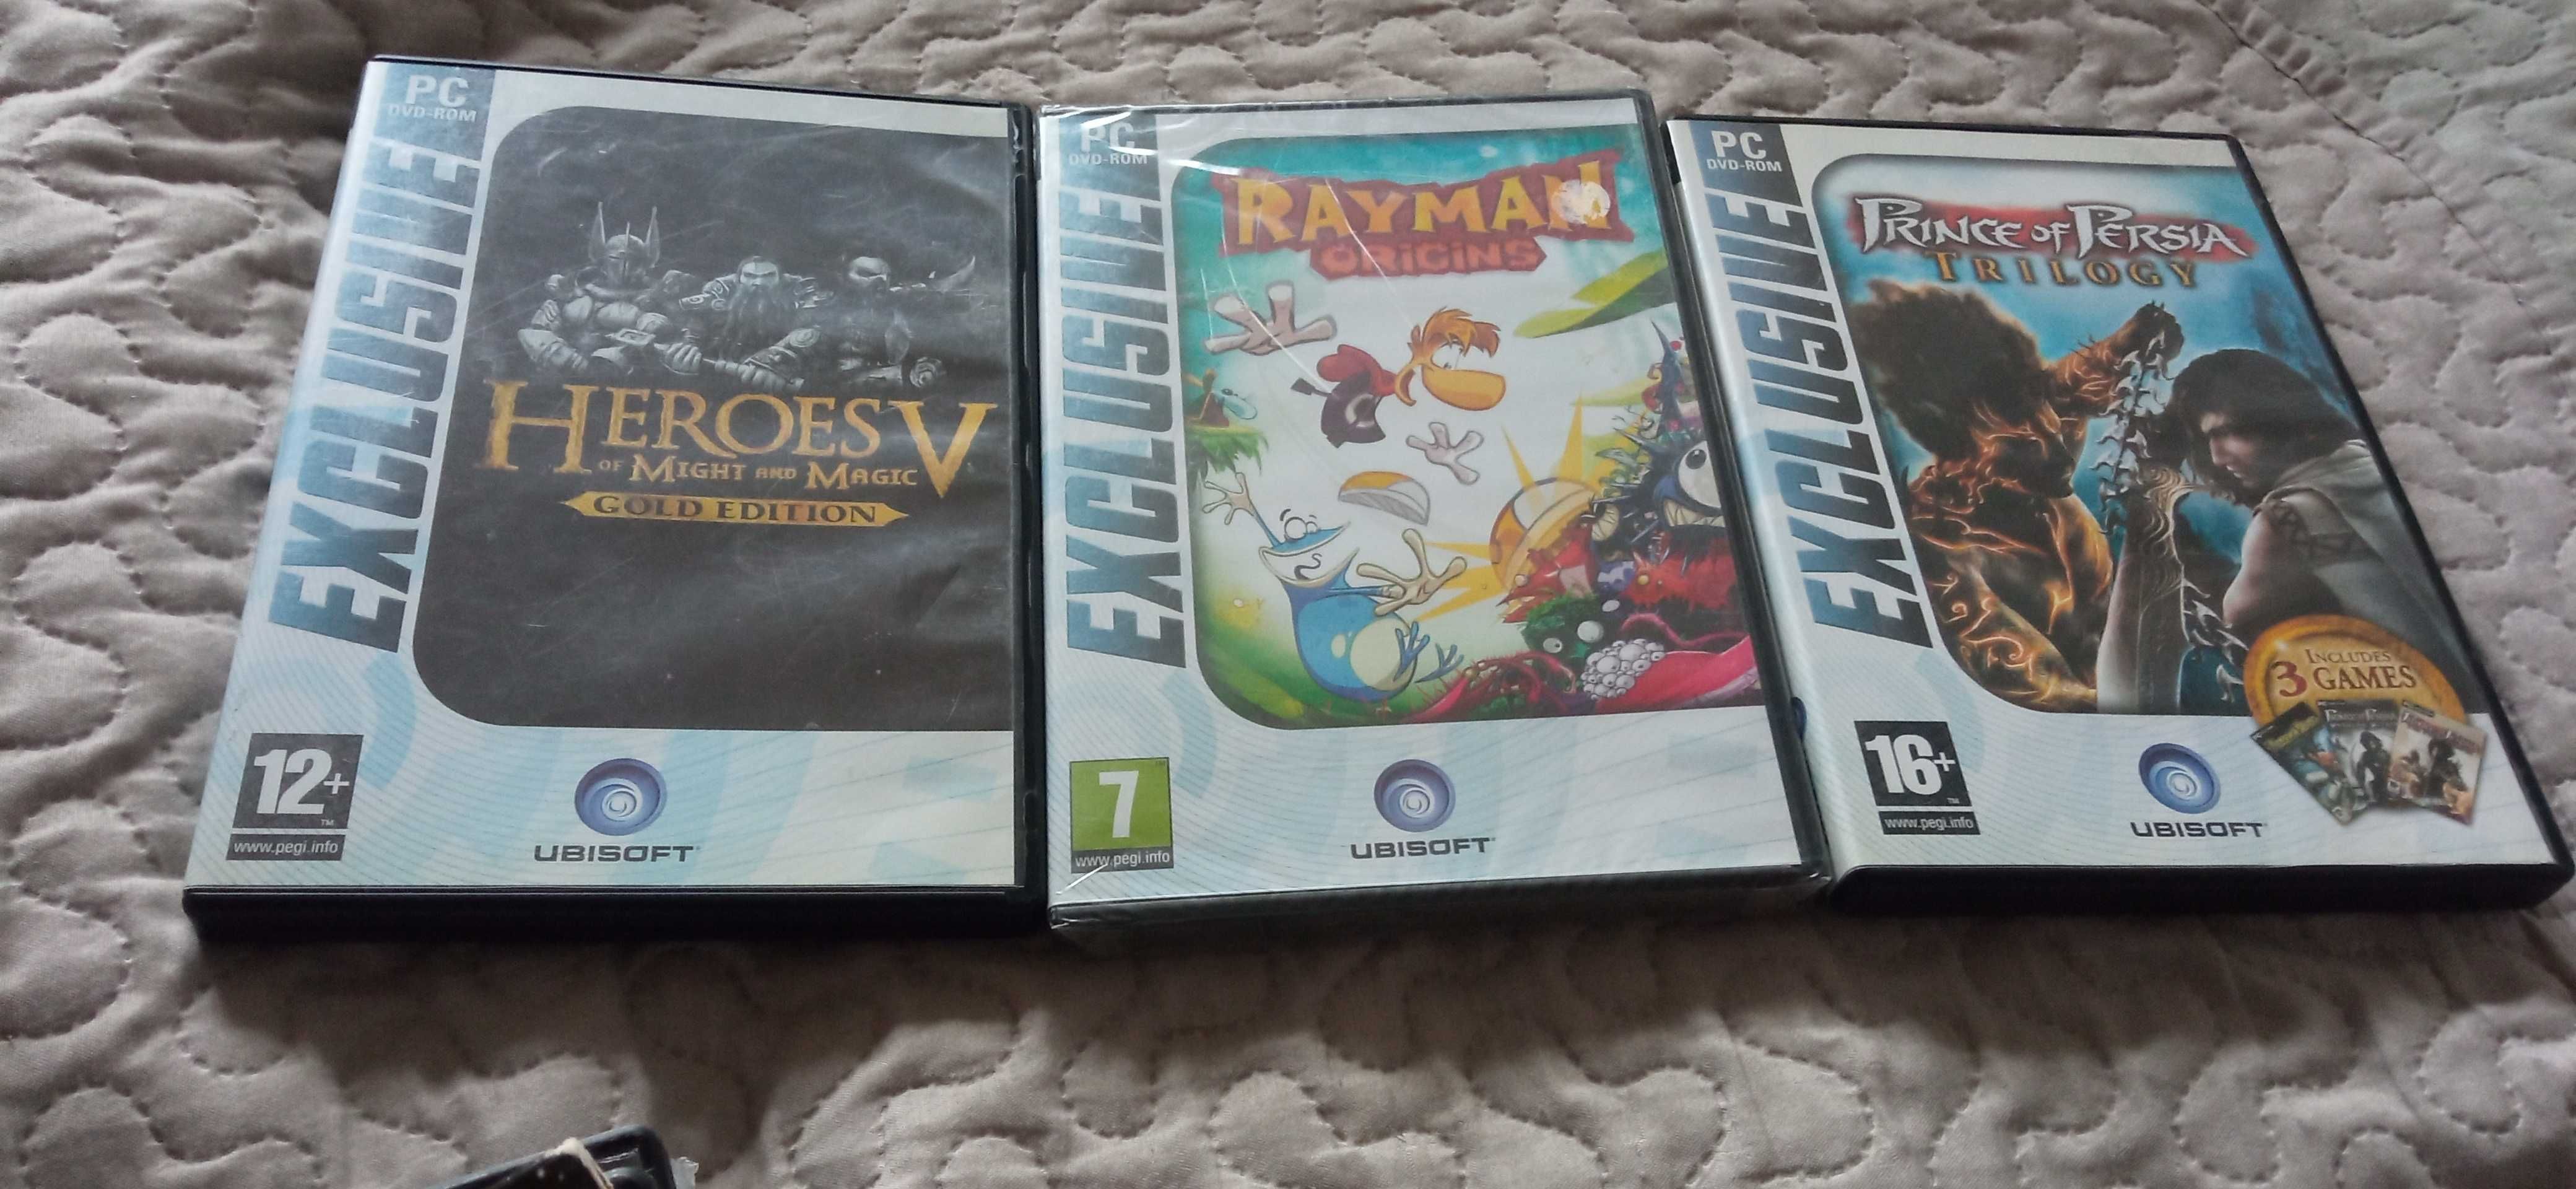 Zestaw gier Heroes V Rayman Prince of Persia